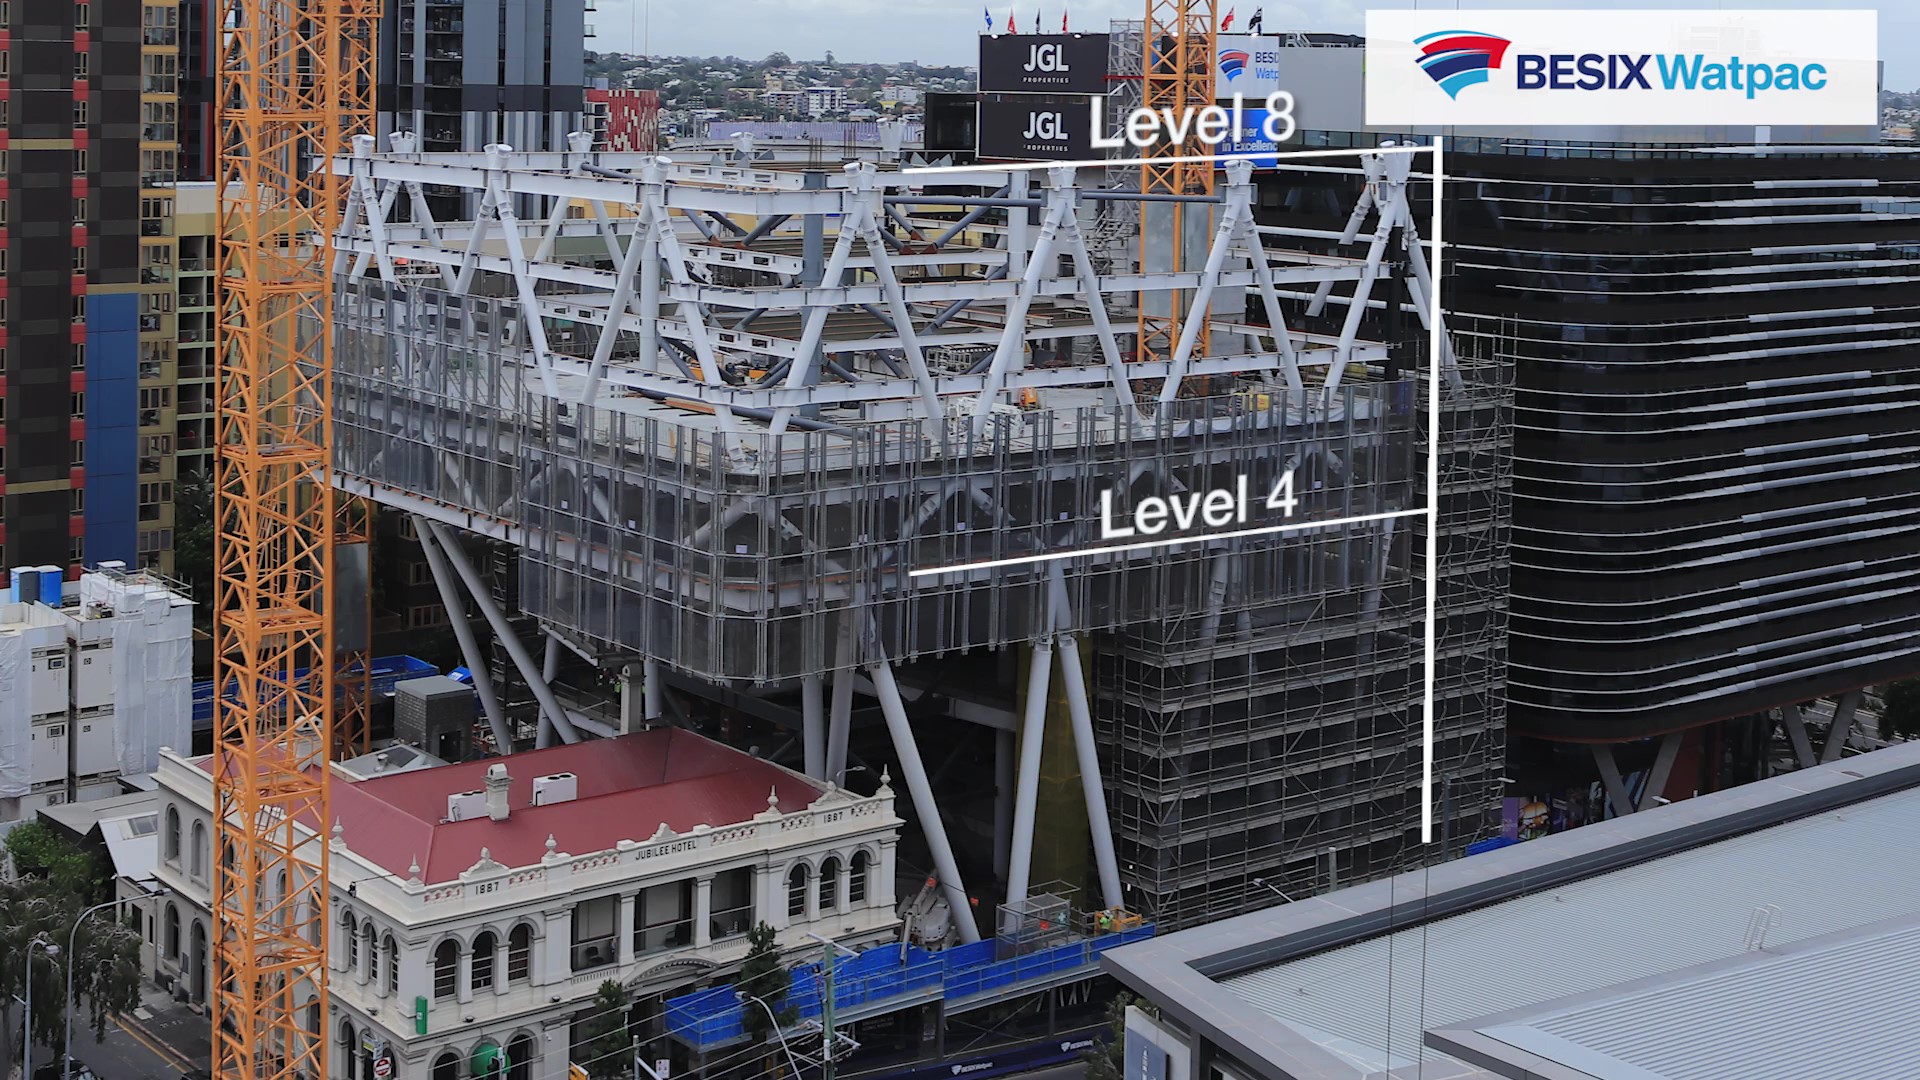 Site photo with graphic indicators highlighting level 4 and level 8